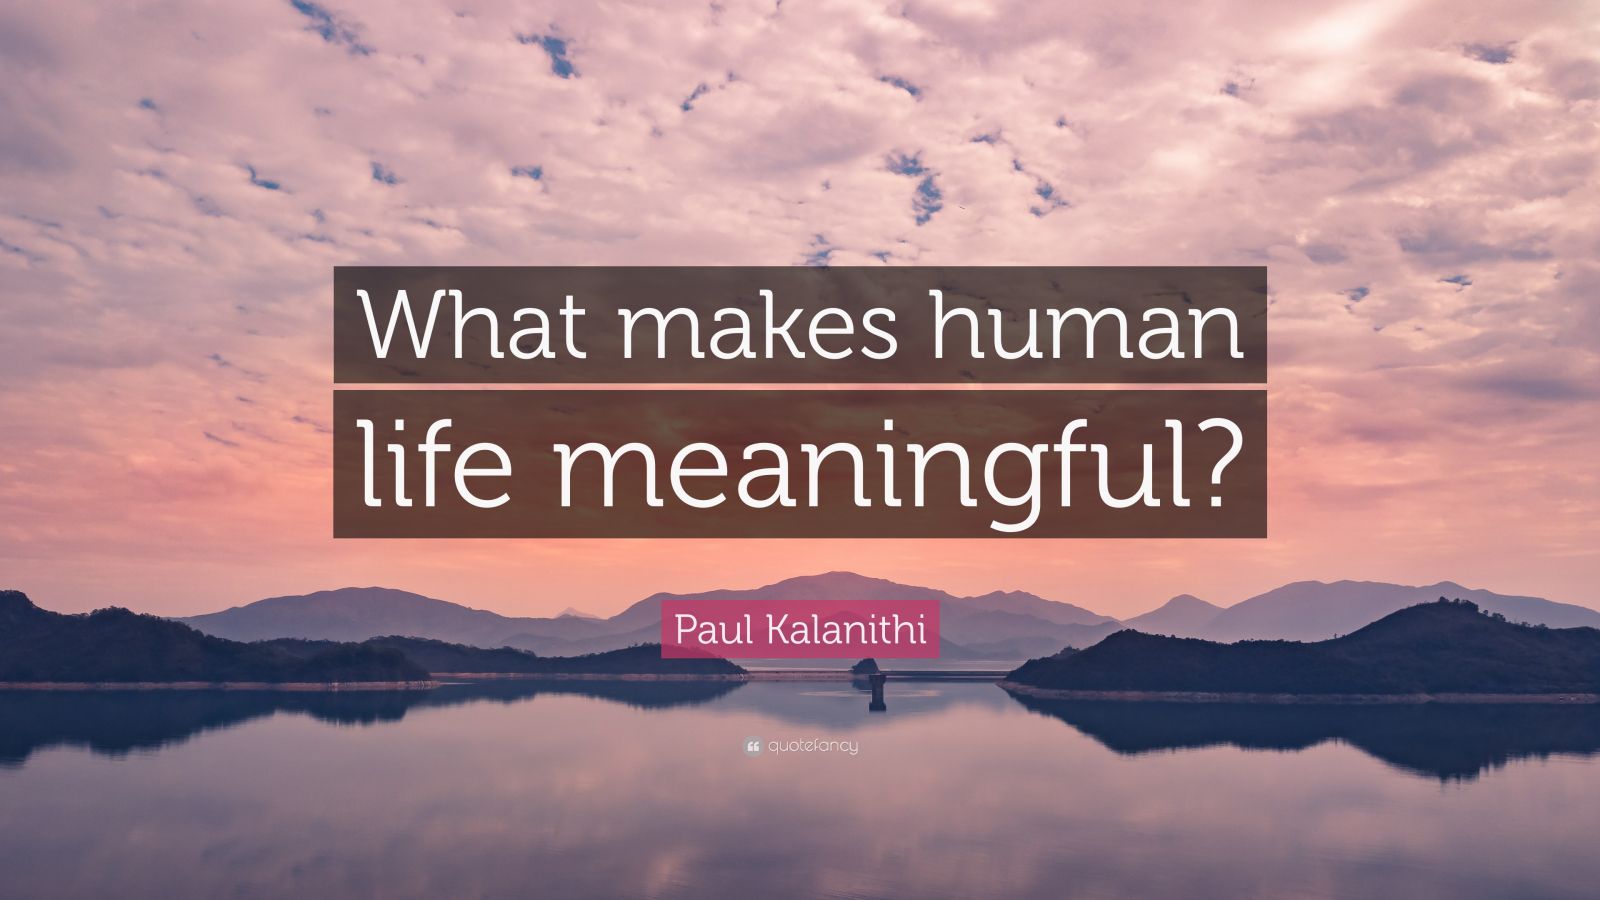 Top 150 Paul Kalanithi Quotes | 2021 Edition | Free Images - QuoteFancy